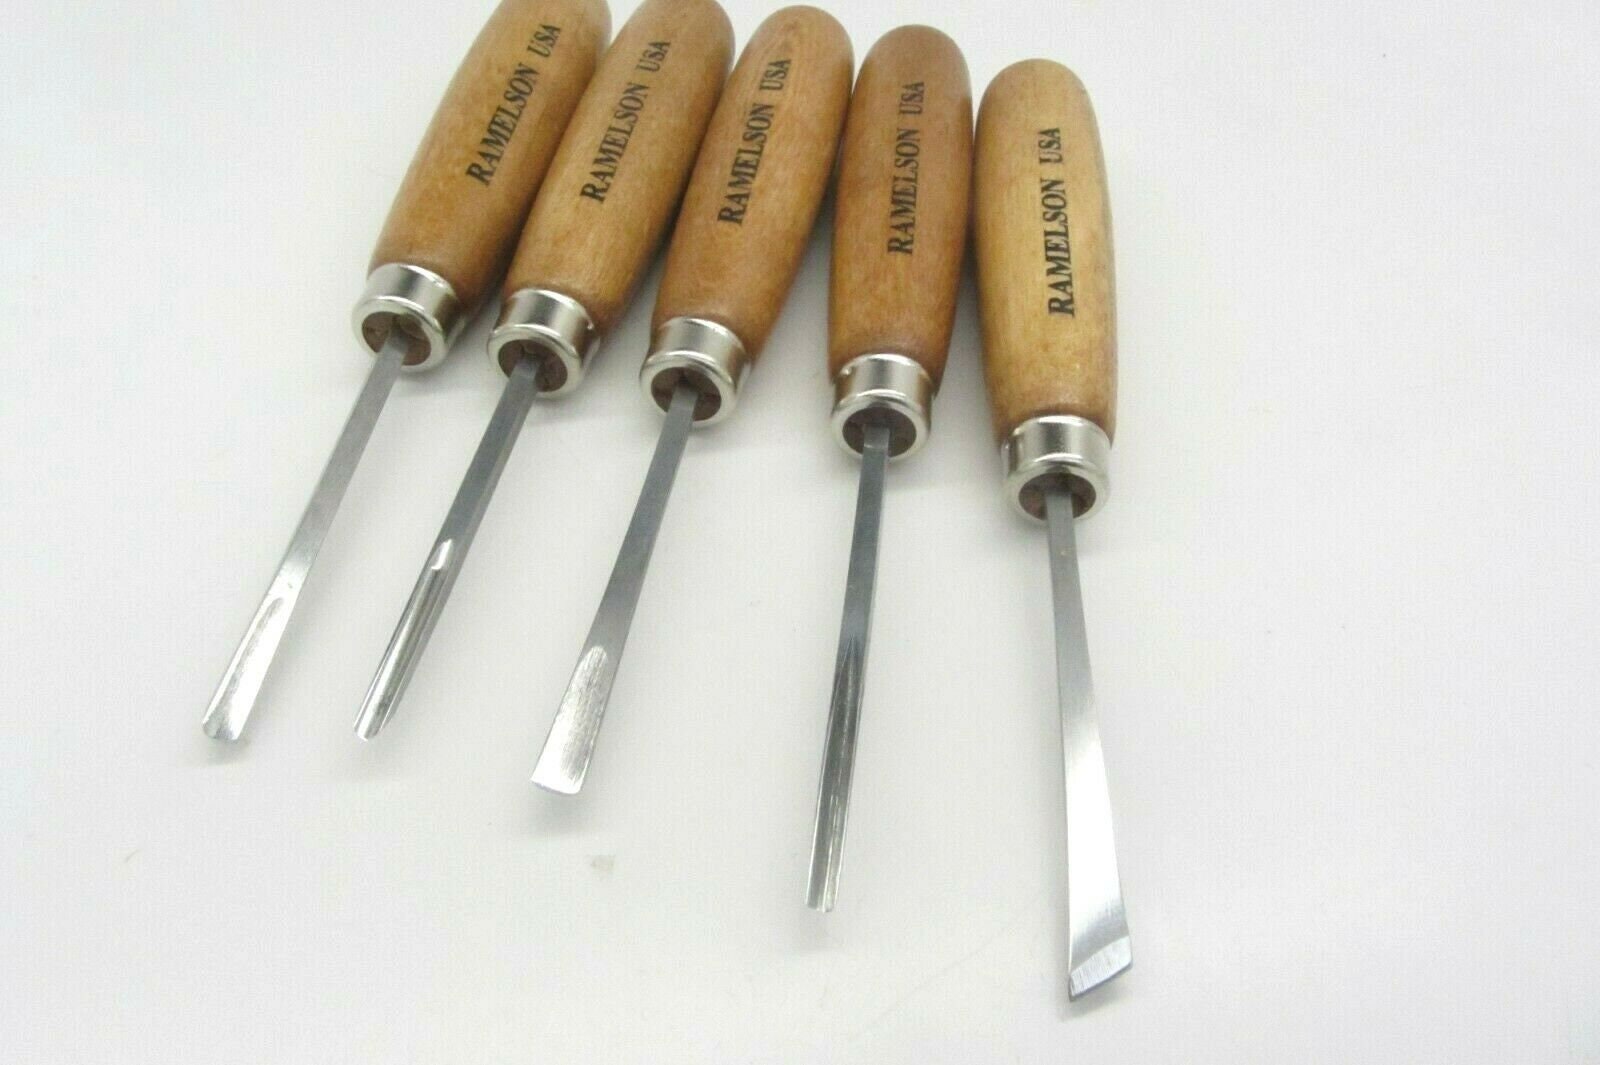 Hermit Tools Wood Carving Tools with Sheath Woodworking Tool 5.1 Draw Knife Wood Chisels Wood Draw Knife Woodworking Drawing Tools Fleshing Knife